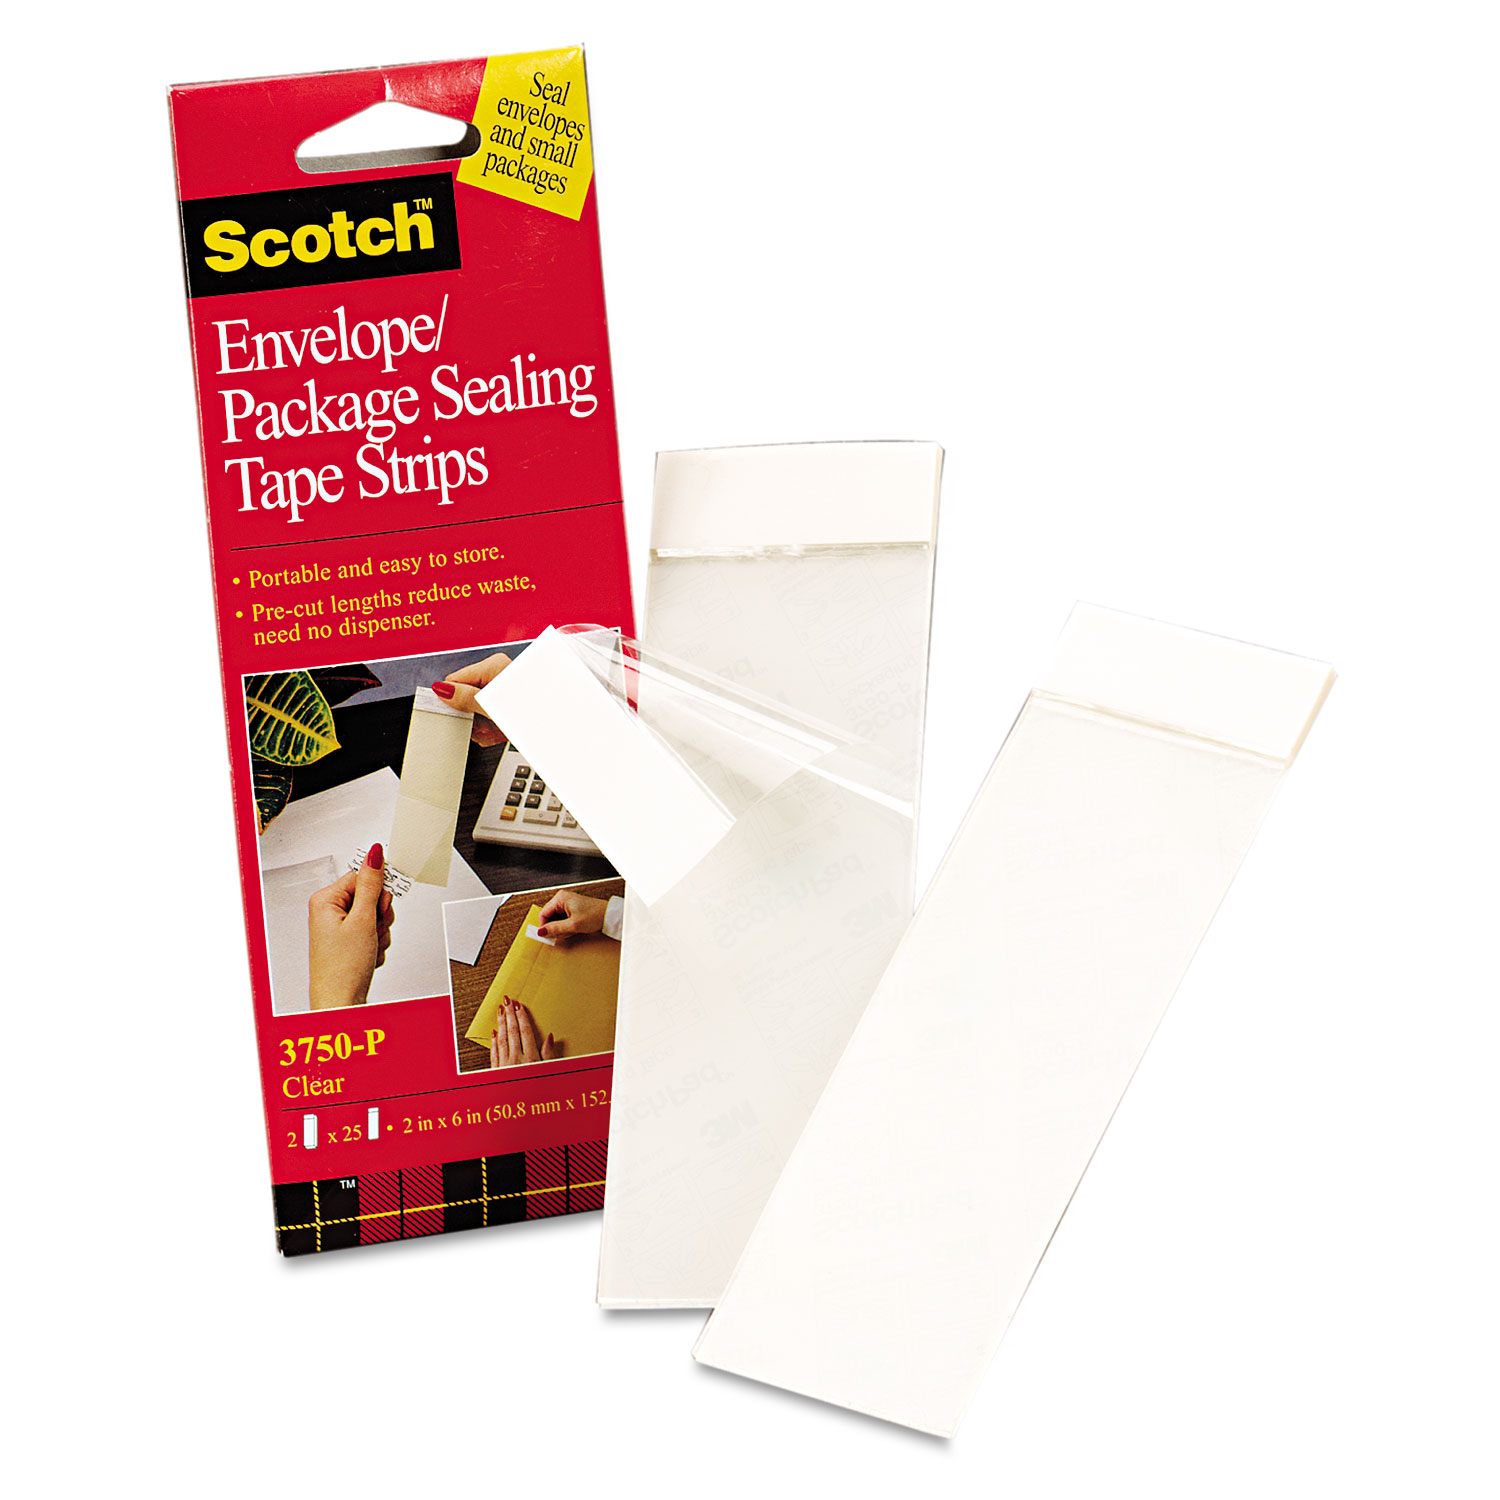 Envelope/Package Sealing Tape Strips, 2 x 6, Clear, 50/Pack